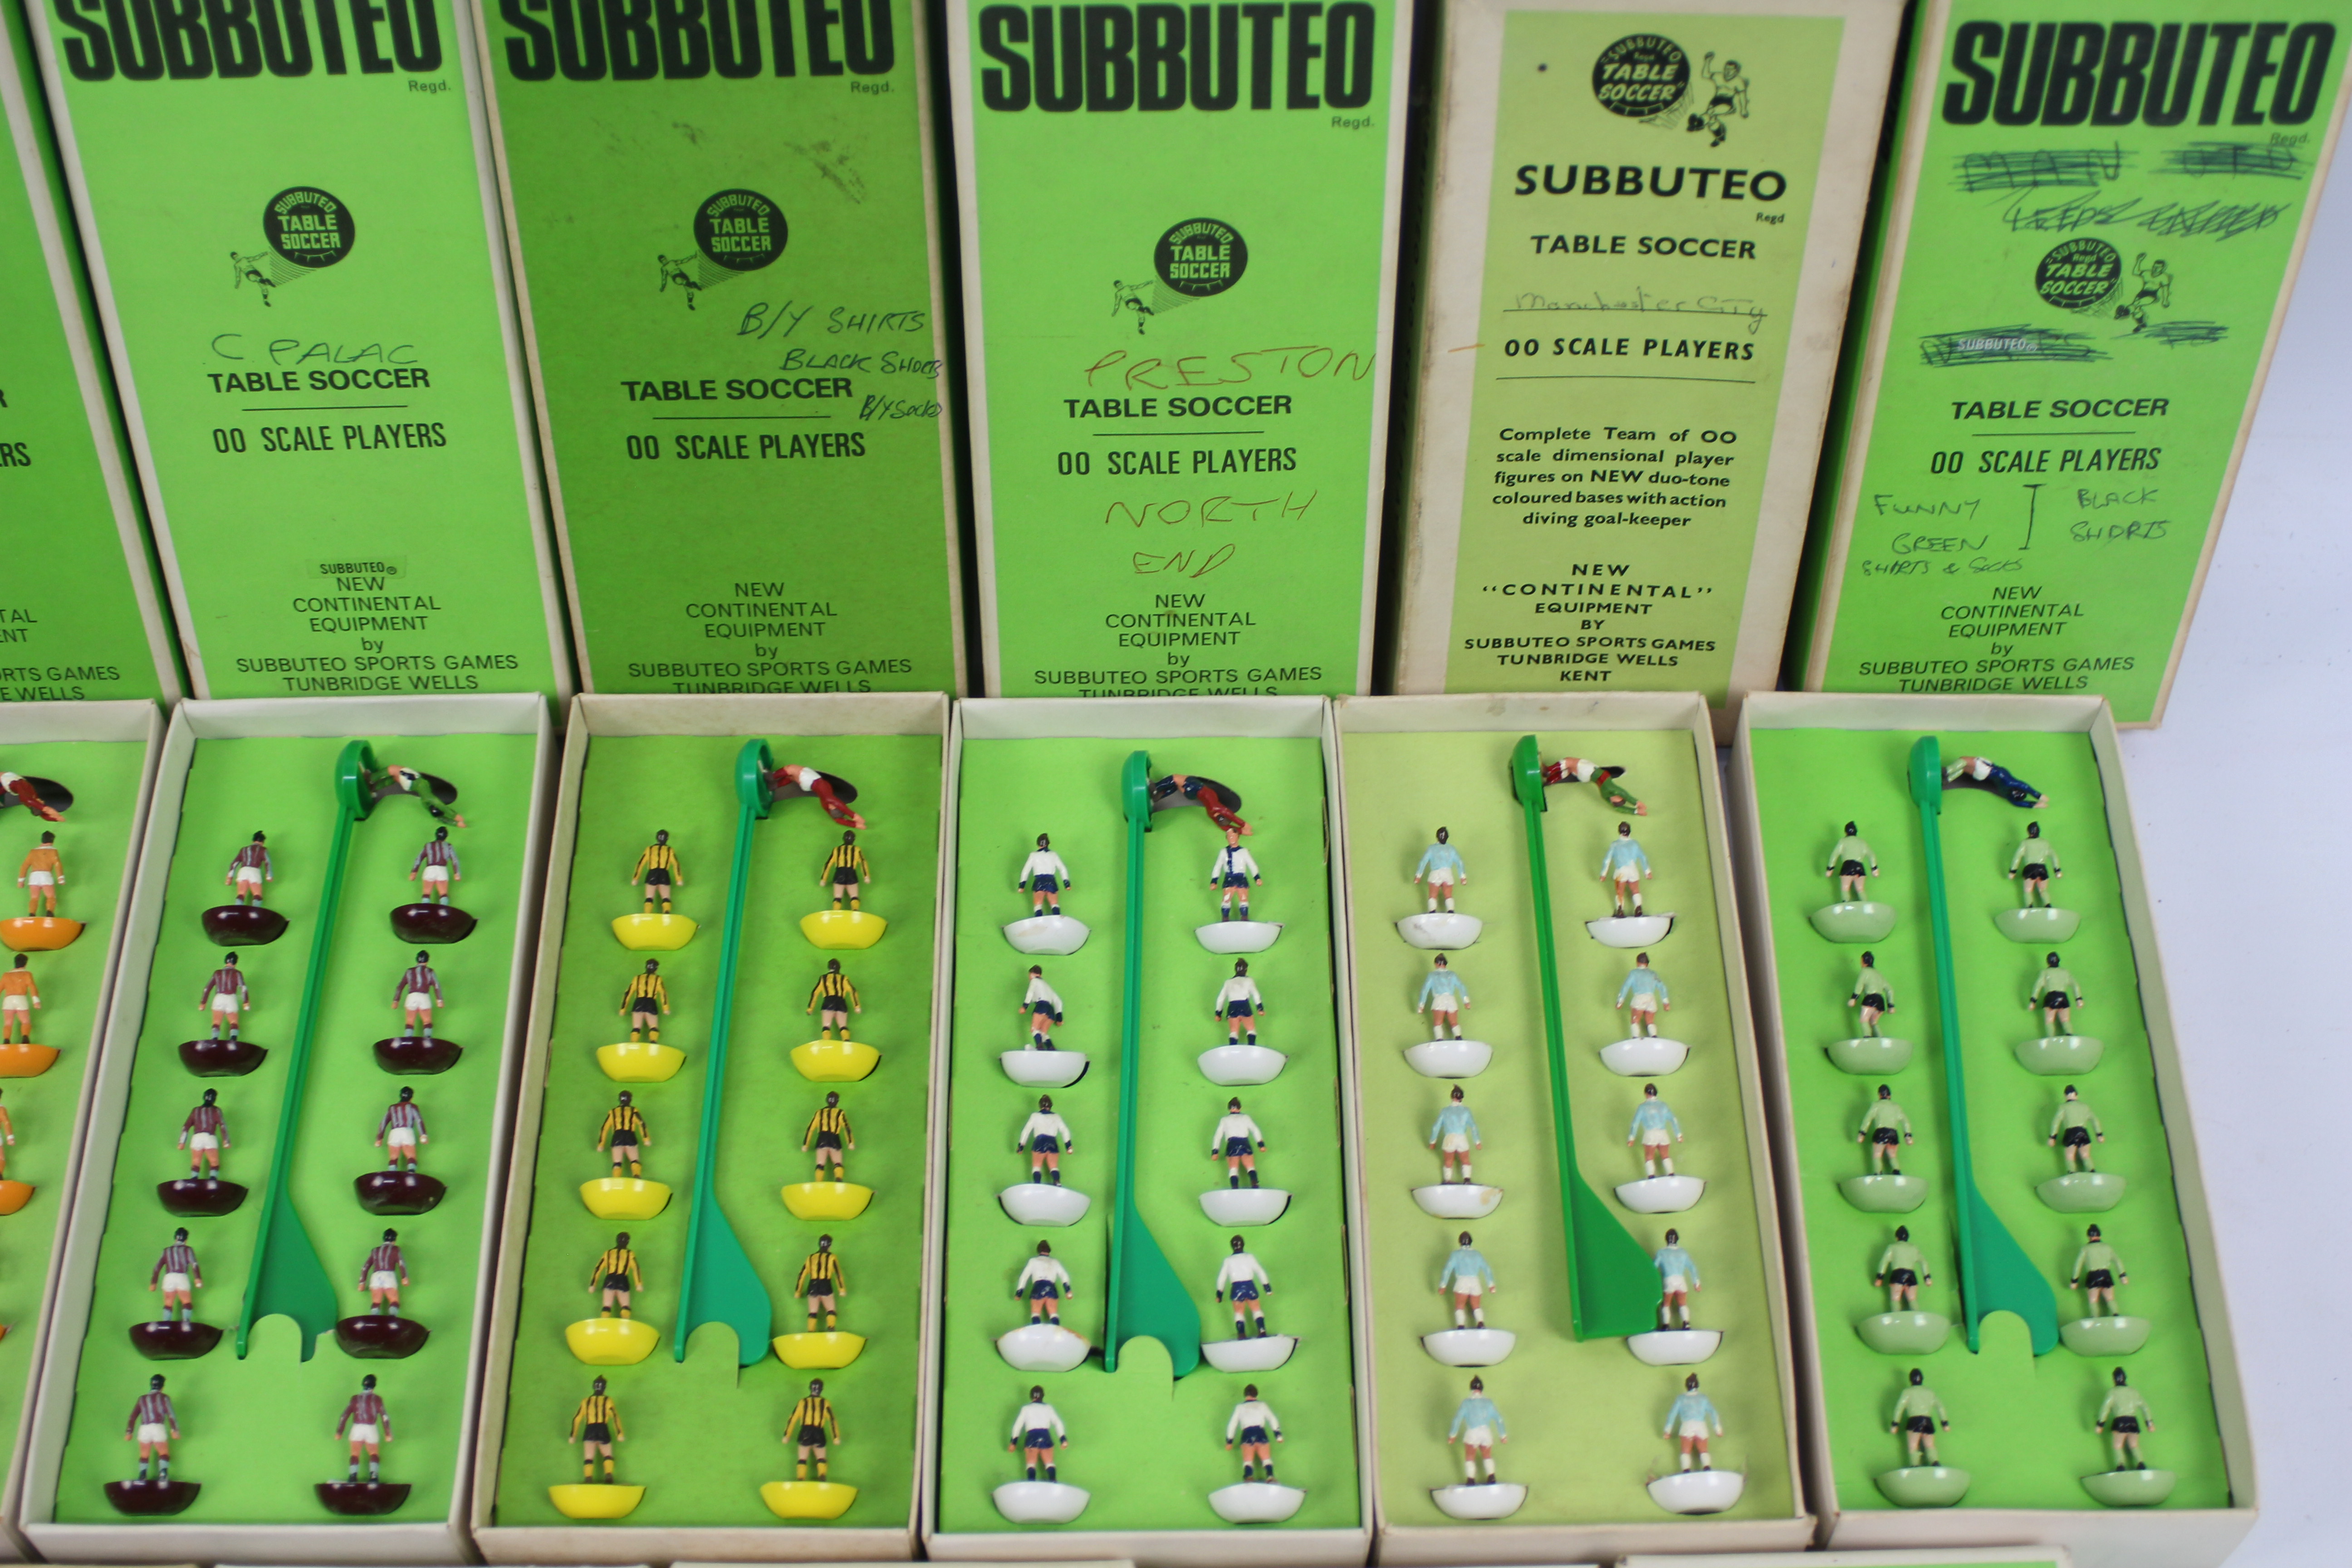 Subbuteo - Table Soccer - 00 Scale Players. - Image 3 of 5